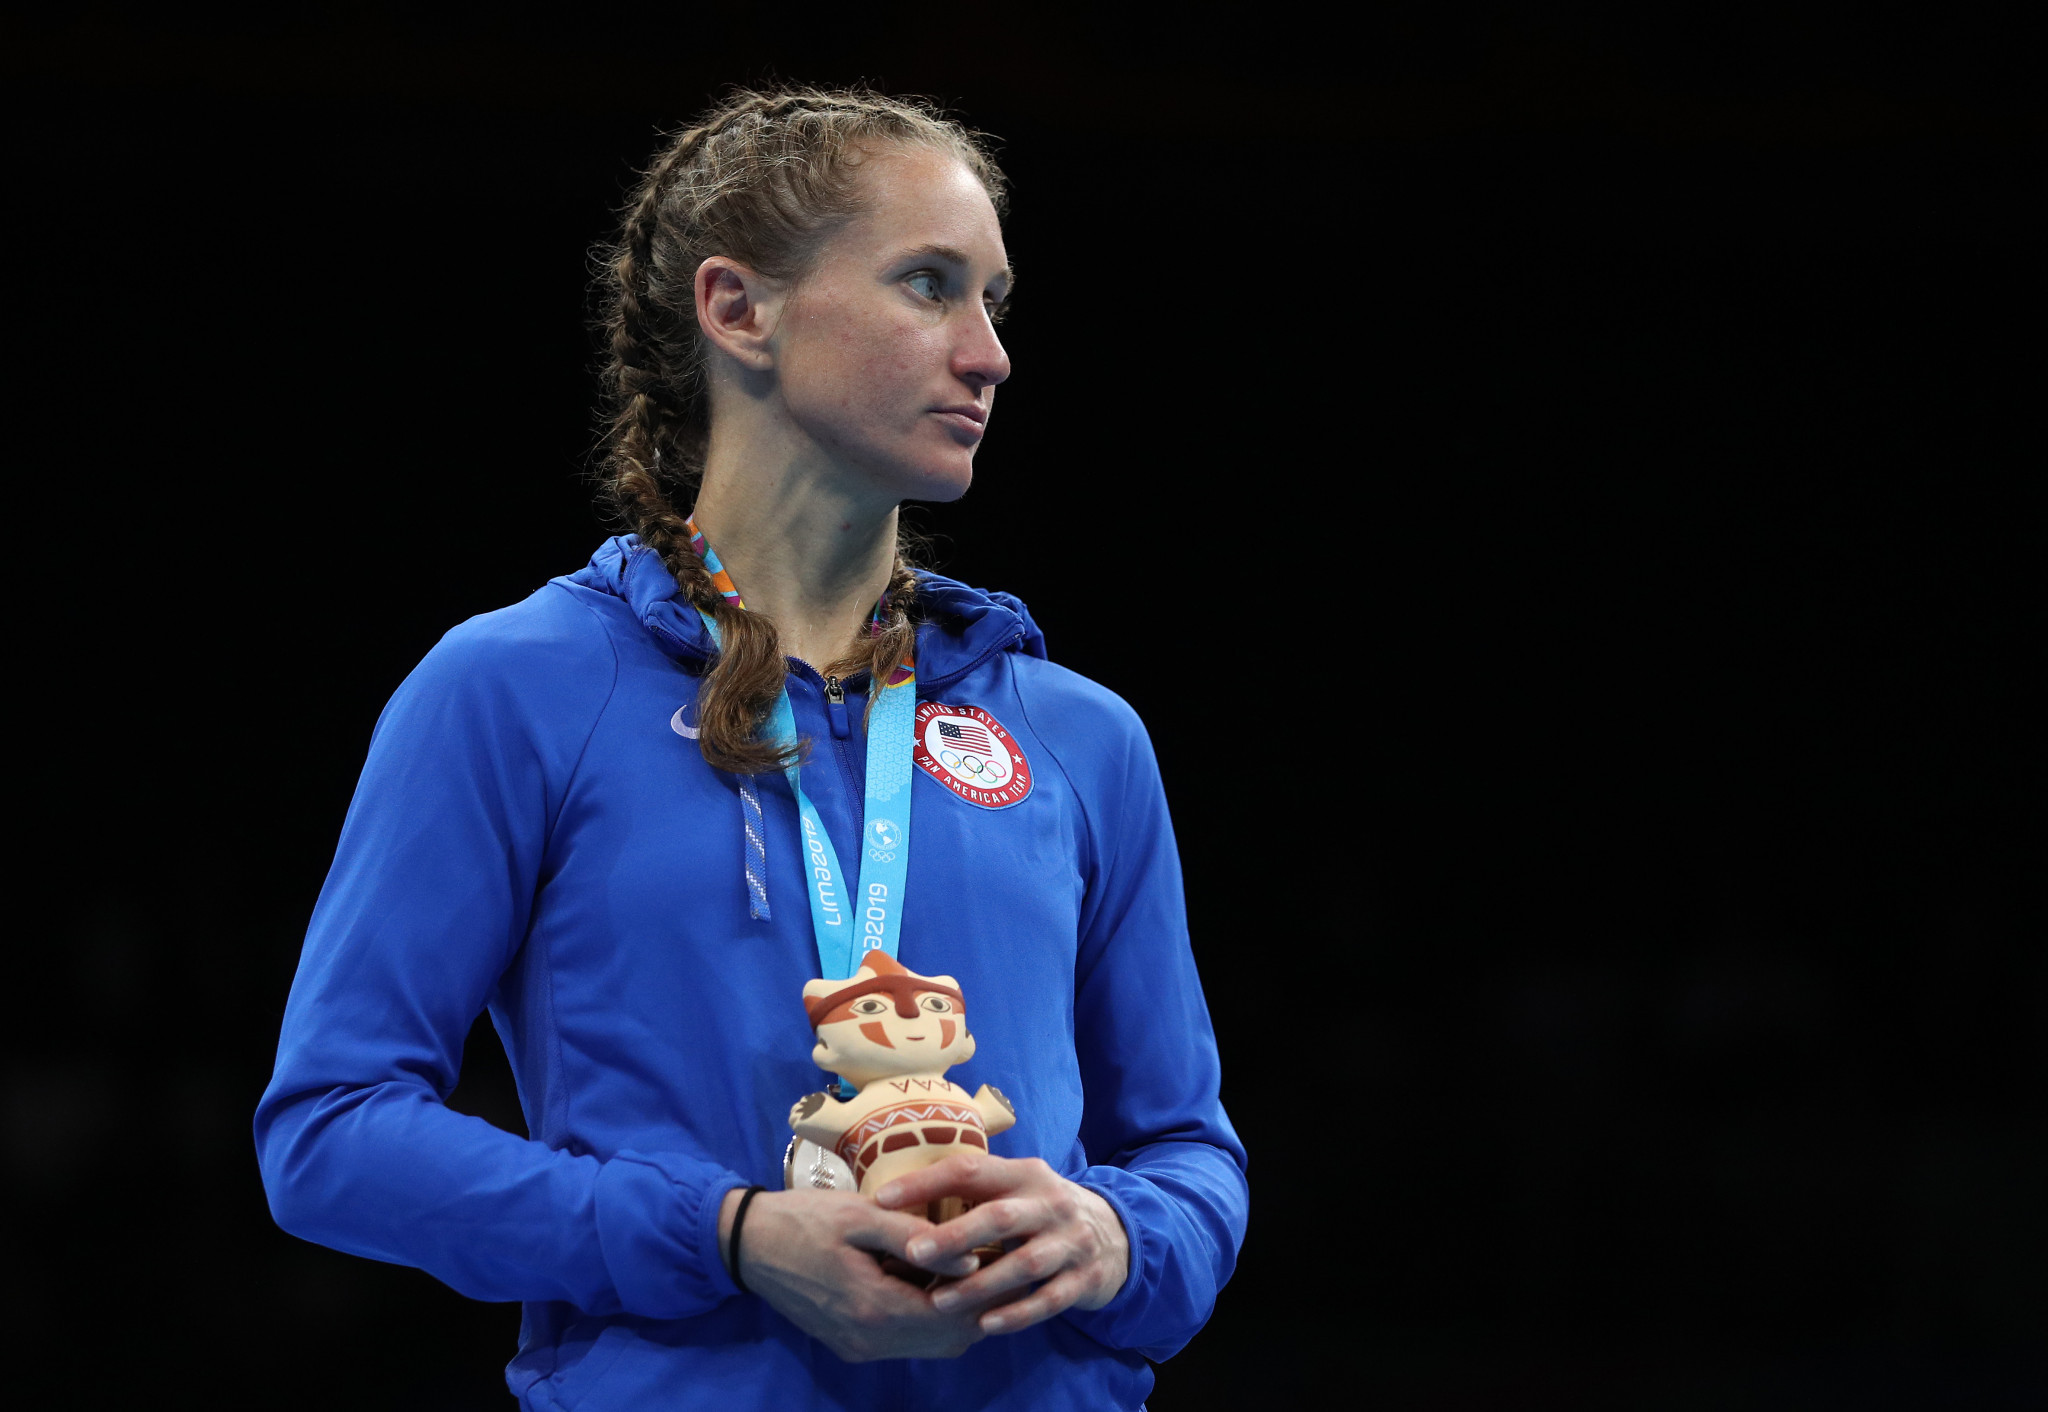 Virginia Fuchs earned a silver medal at the 2019 Pan American Games in Lima ©Getty Images